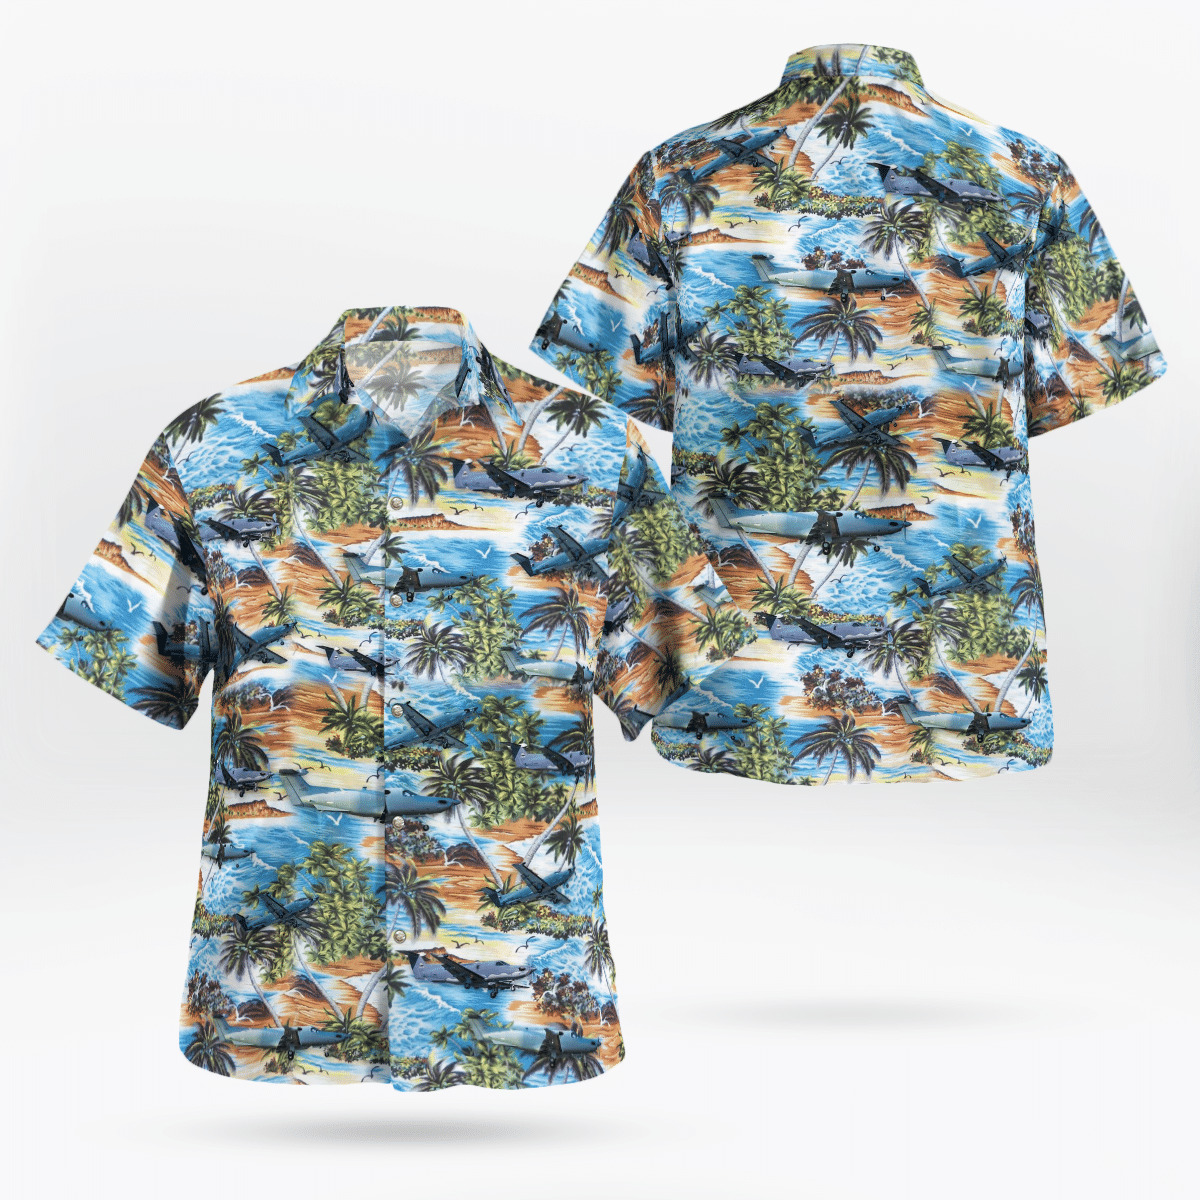 Consider getting these Hawaiian Shirt for your friends 427